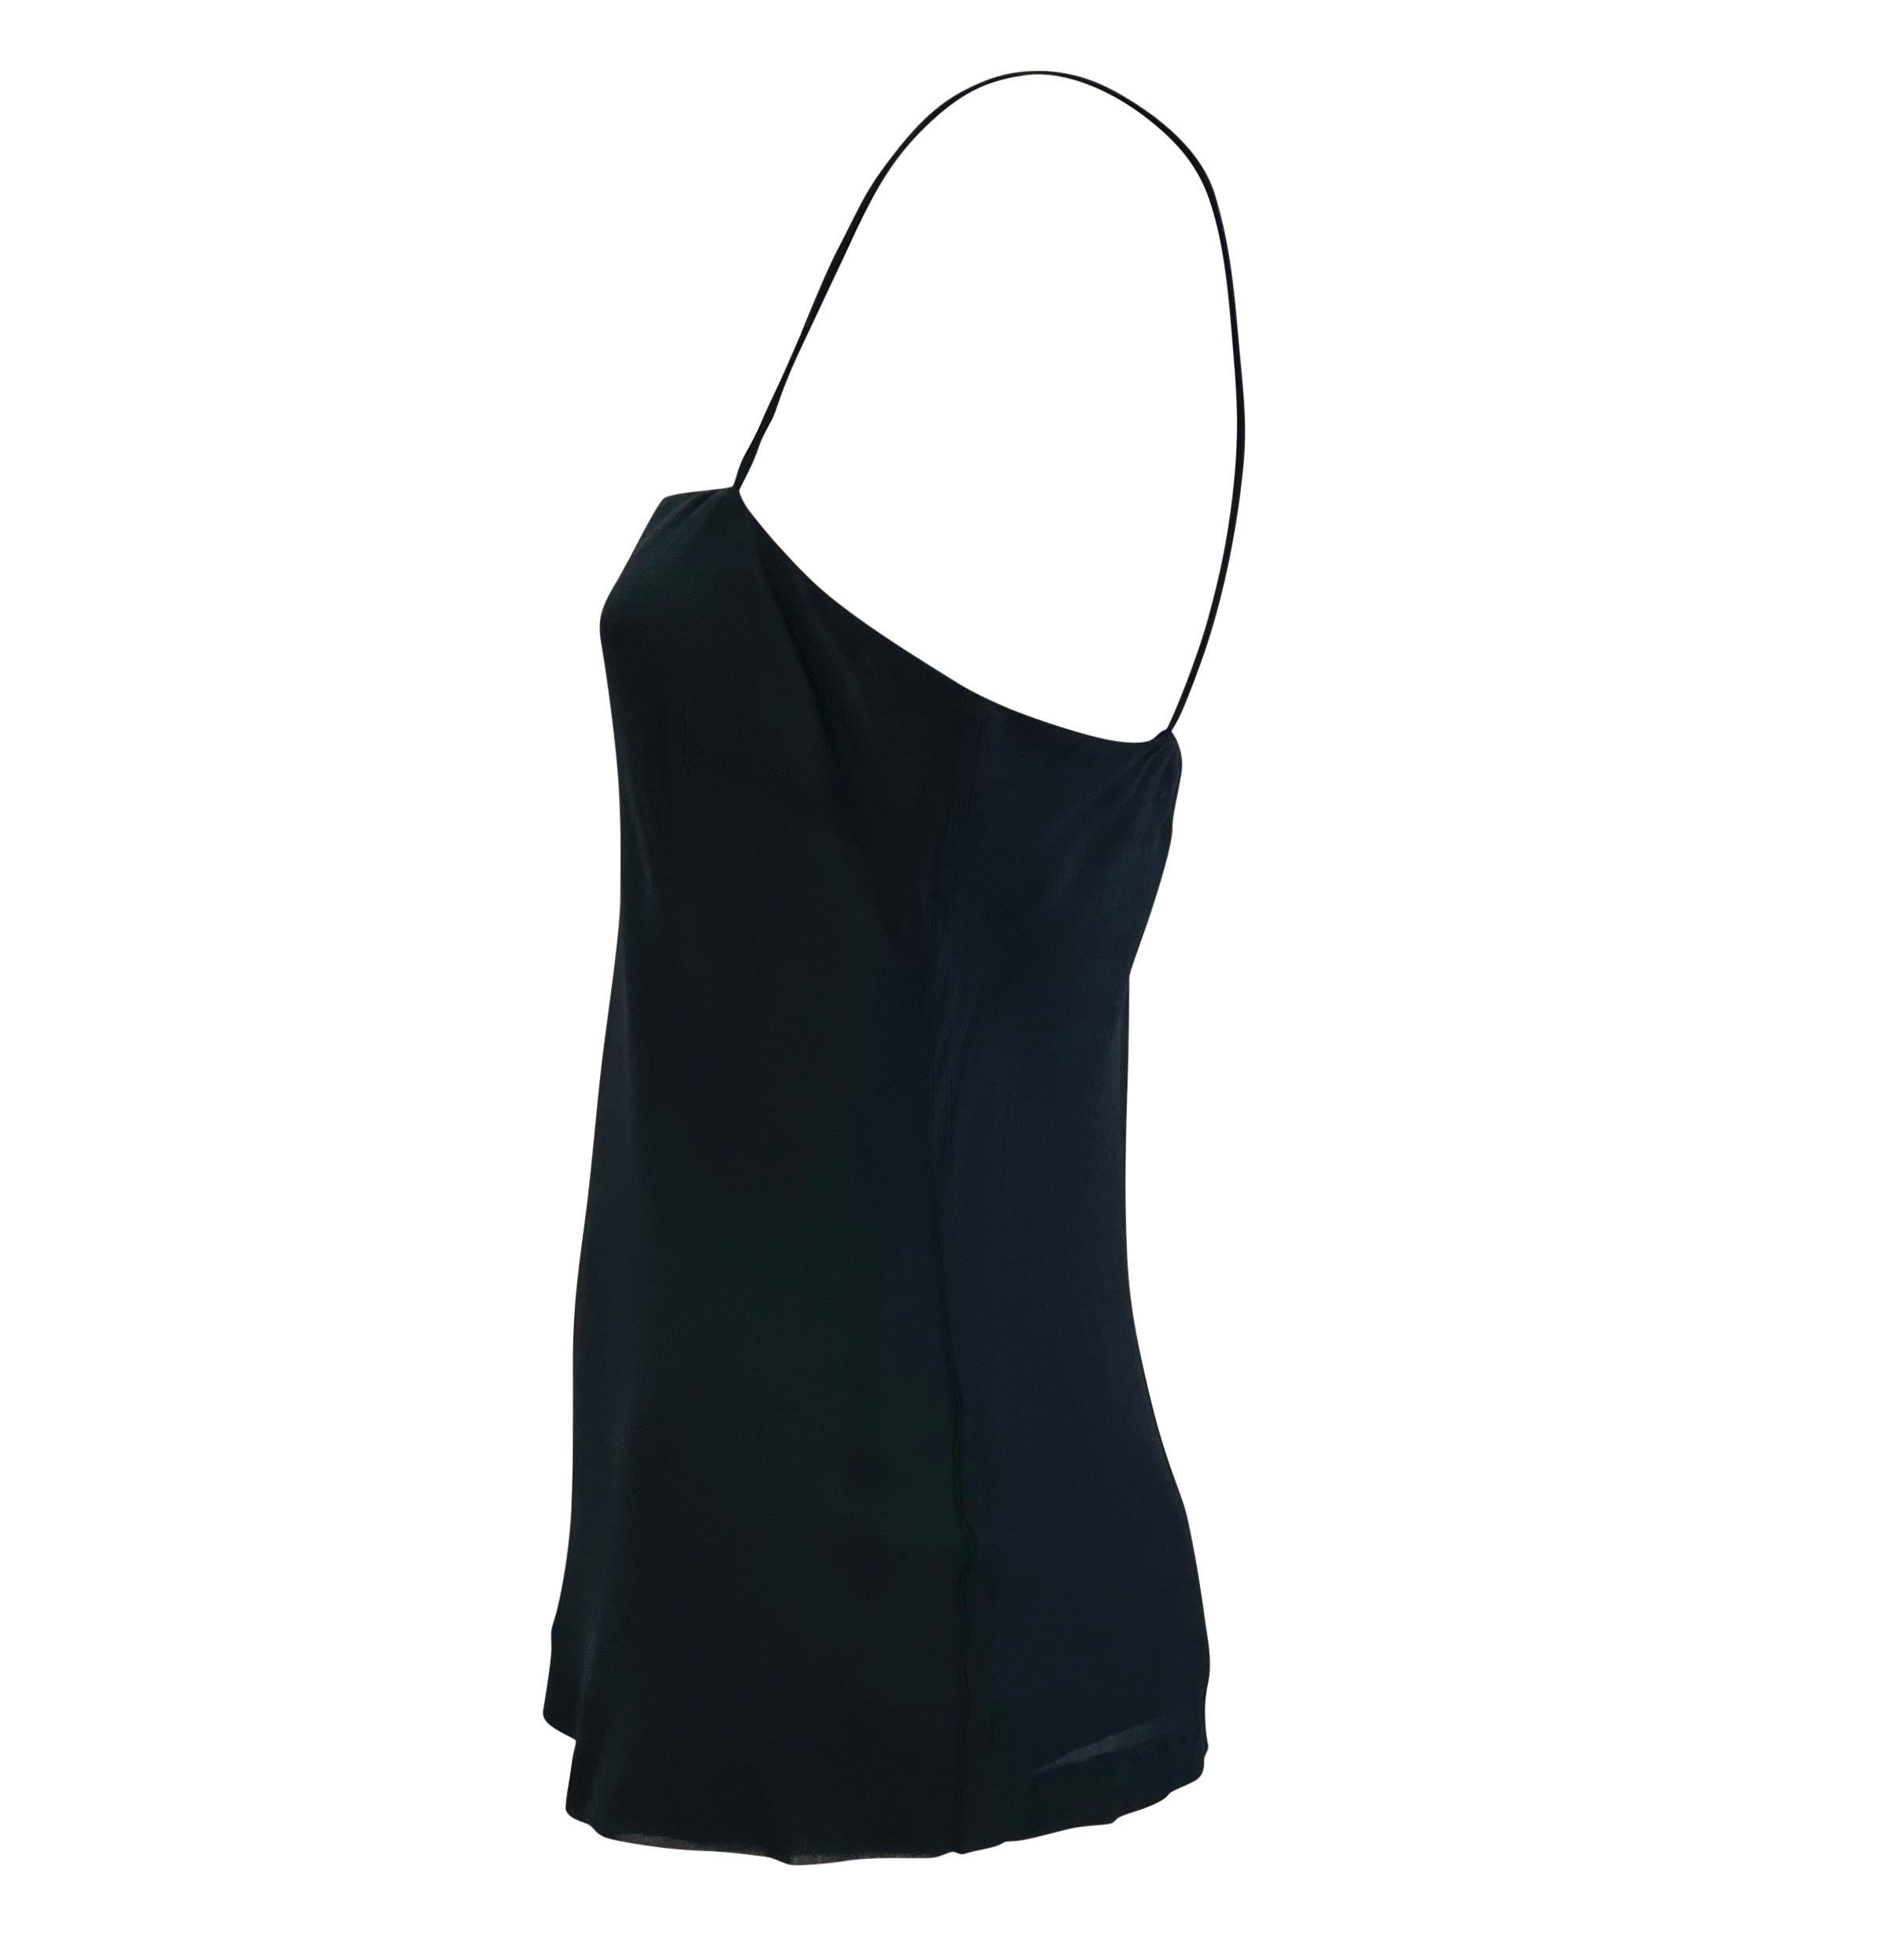 Presenting a sensual Gucci tank top, designed by Tom Ford. This uniquely shaped tank top features spaghetti straps with an a-line construction. Not your average tank top, this shirt was designed for the Spring/Summer 1997 collection and is the